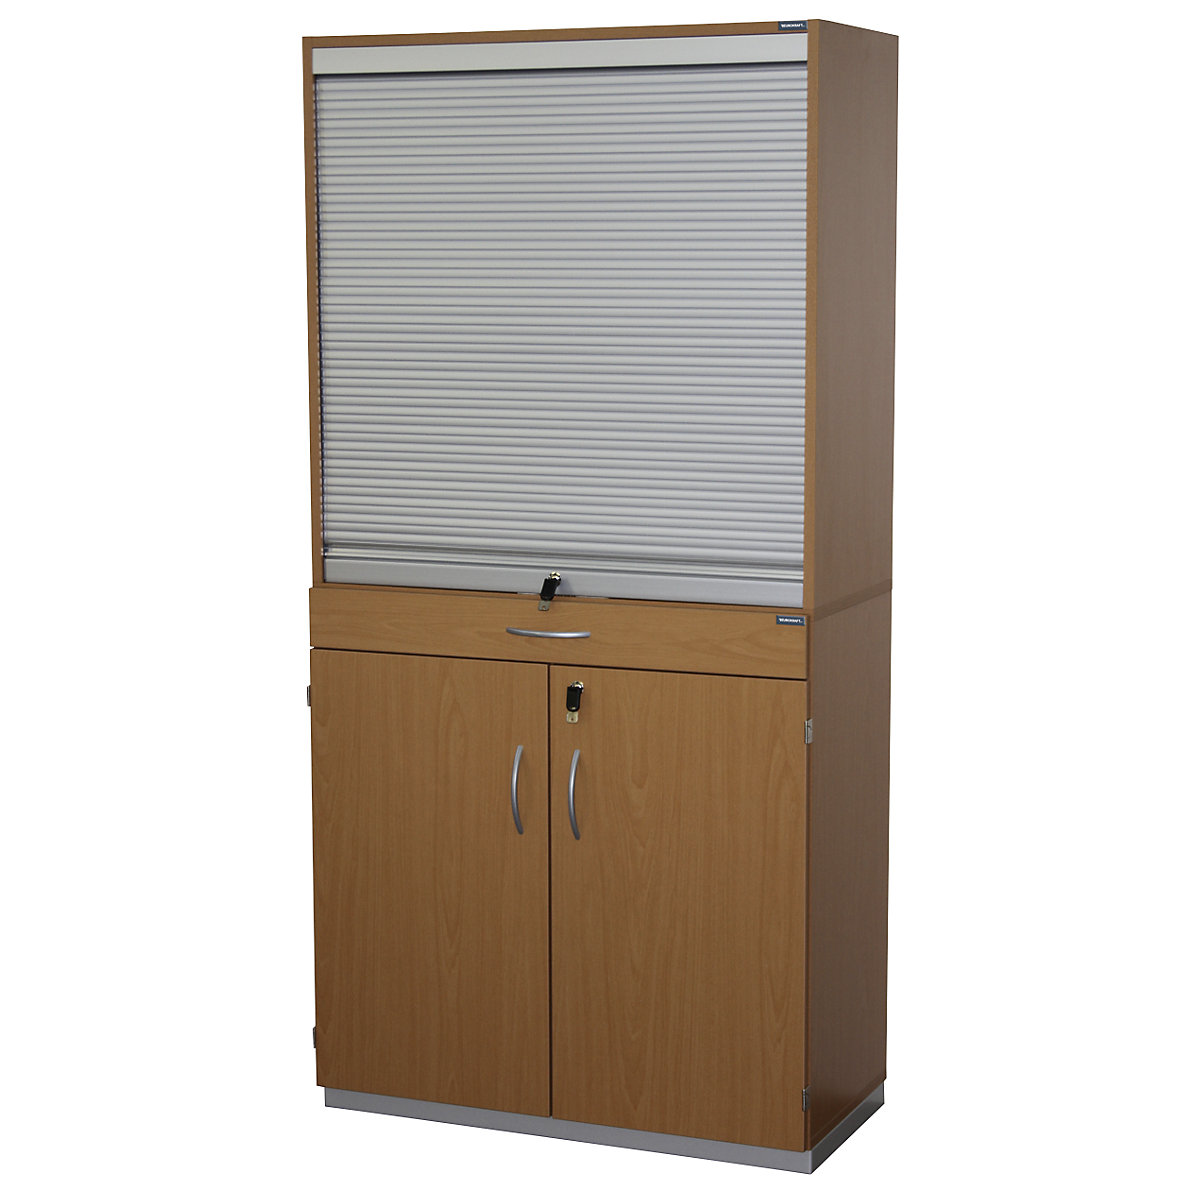 EUROKRAFTpro – Sorting cupboard with roller shutter and add-on drawer unit, HxWxD 1864 x 913 x 440 mm, 18 compartments, beech finish